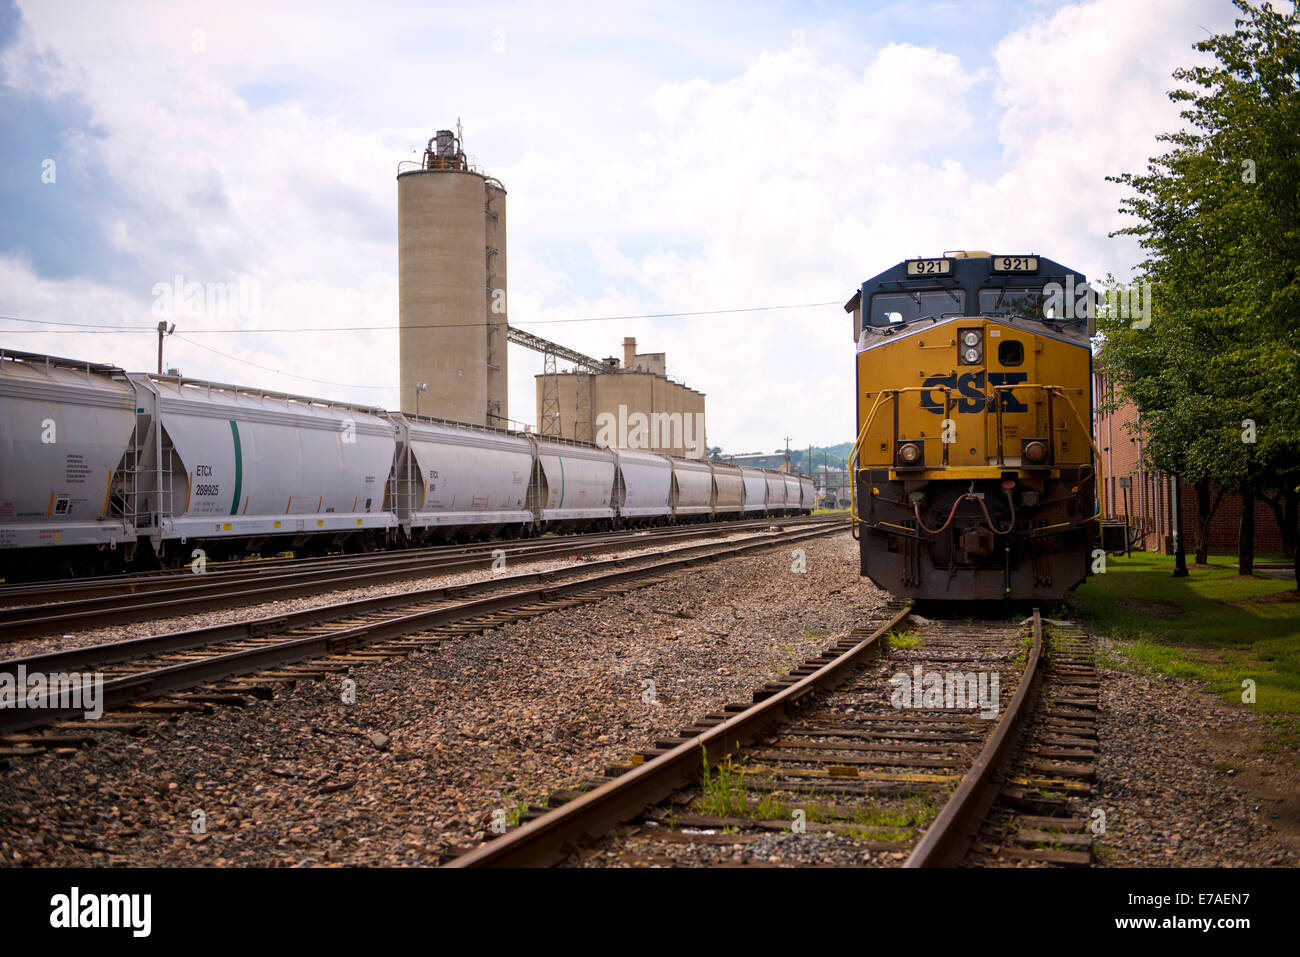 On coming CSX Diesel Locomotive and Industrial Rail Cars on train Tracks in Kingsport, Tennessee Stock Photo